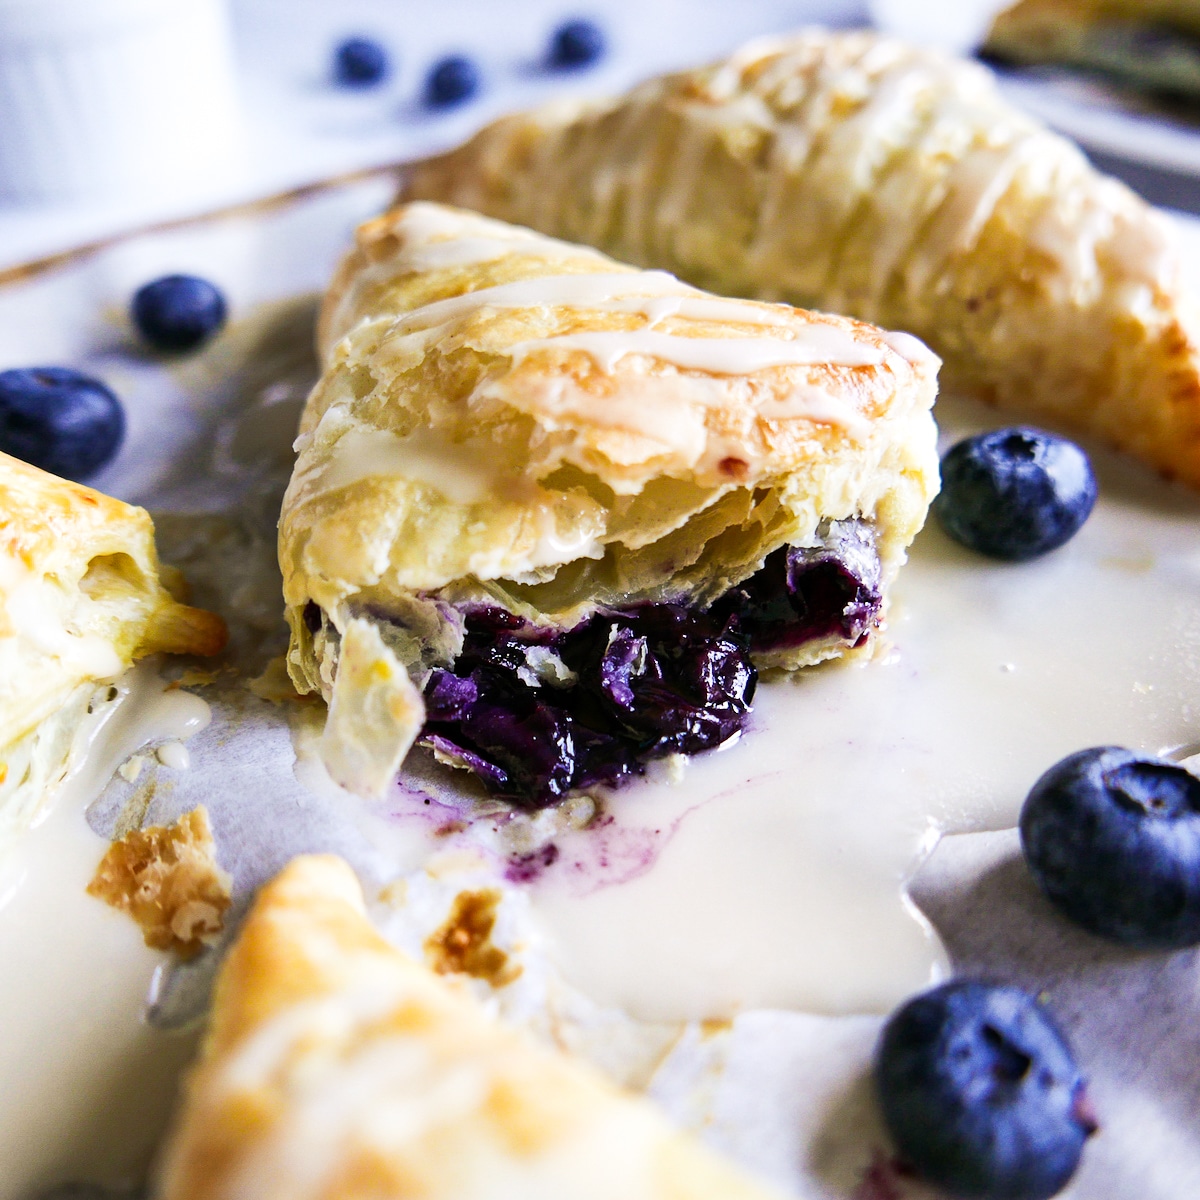 Puff pastry blueberry turnover cut in half with fresh blueberries next to it.